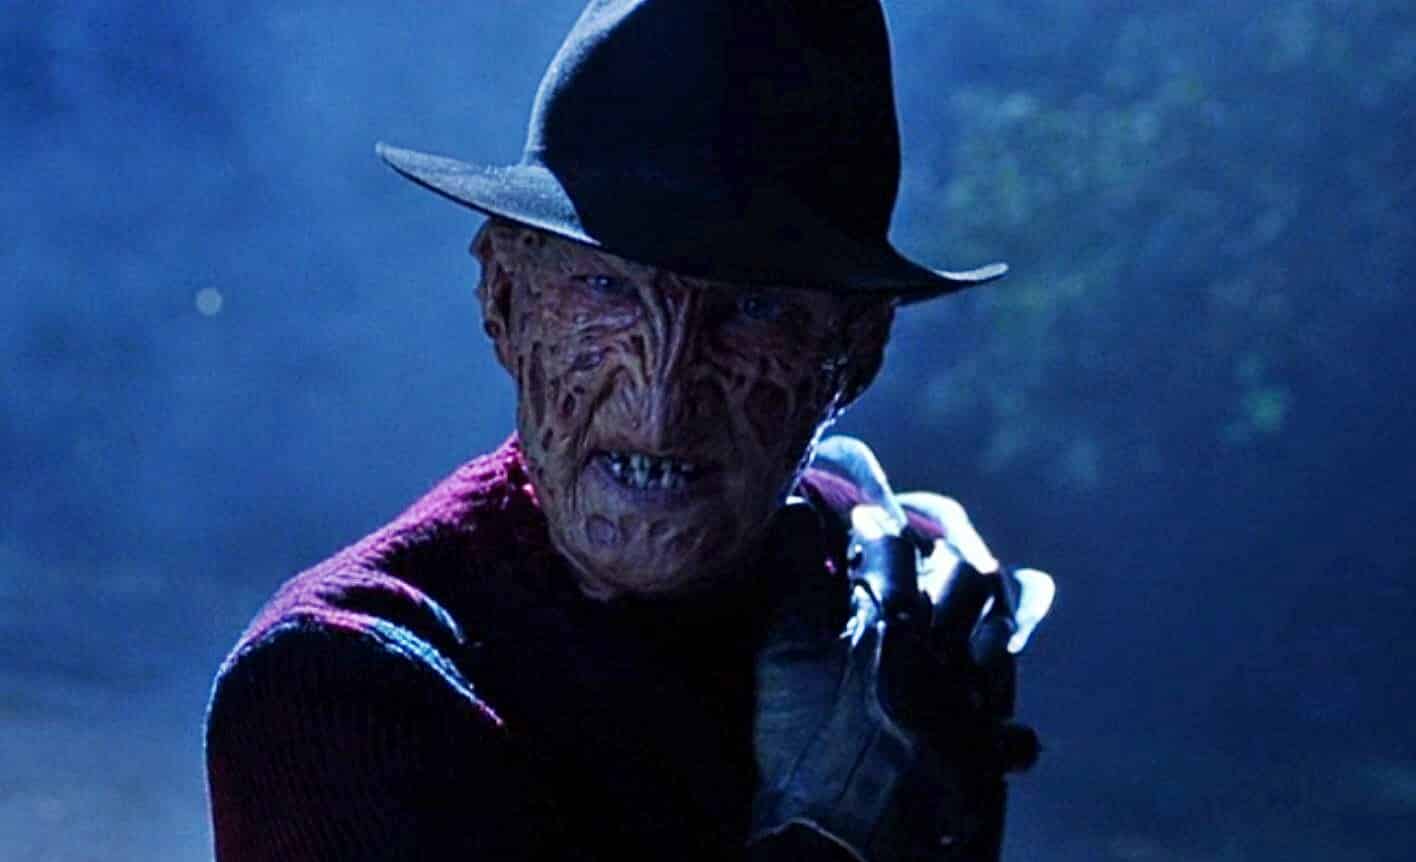 Freddy’s Supernatural Abilities and Powers in the Dream World